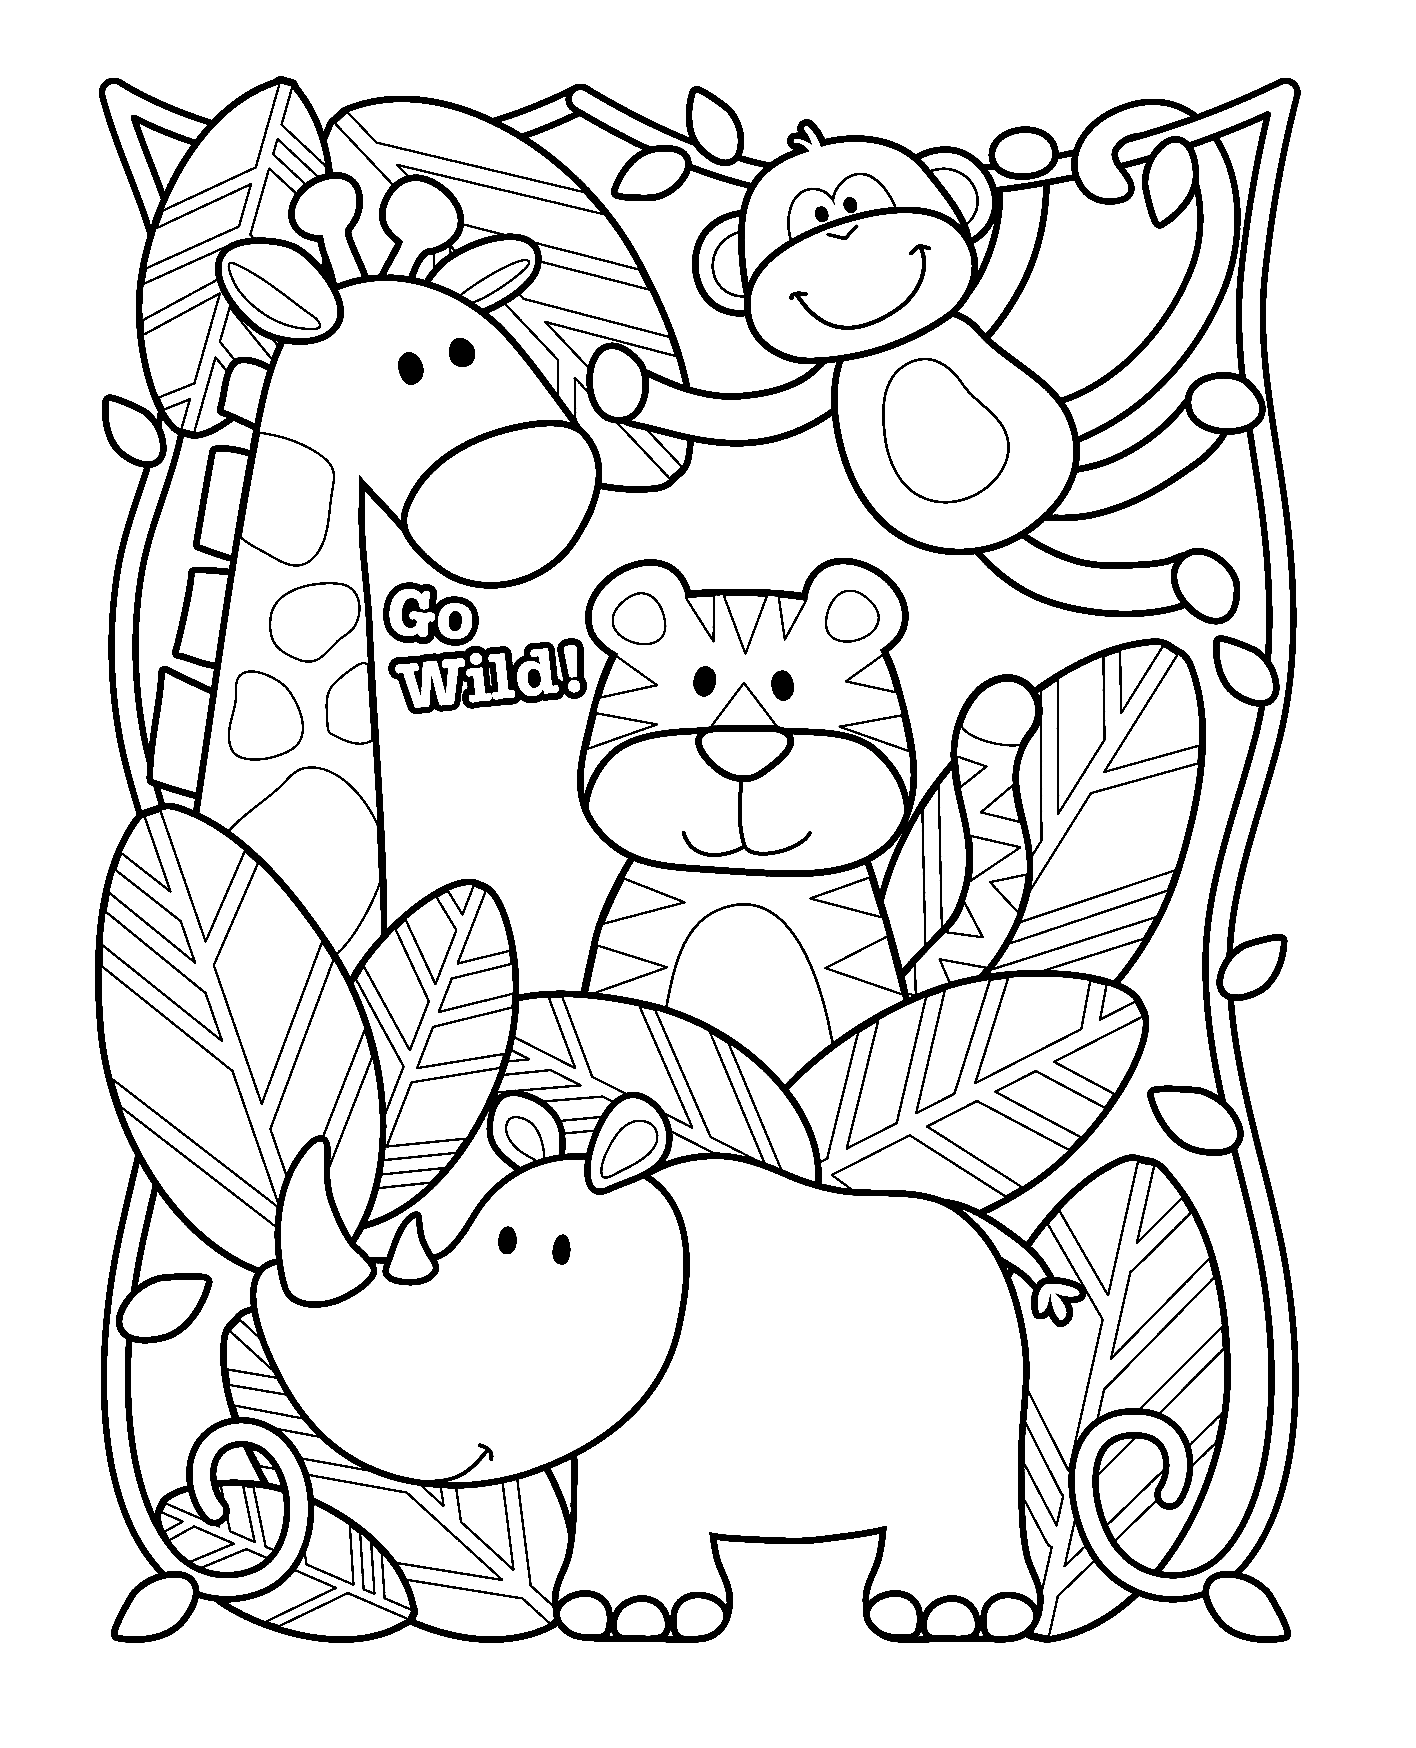 zoo-coloring-pages-bring-the-zoo-to-your-children-s-house-coloring